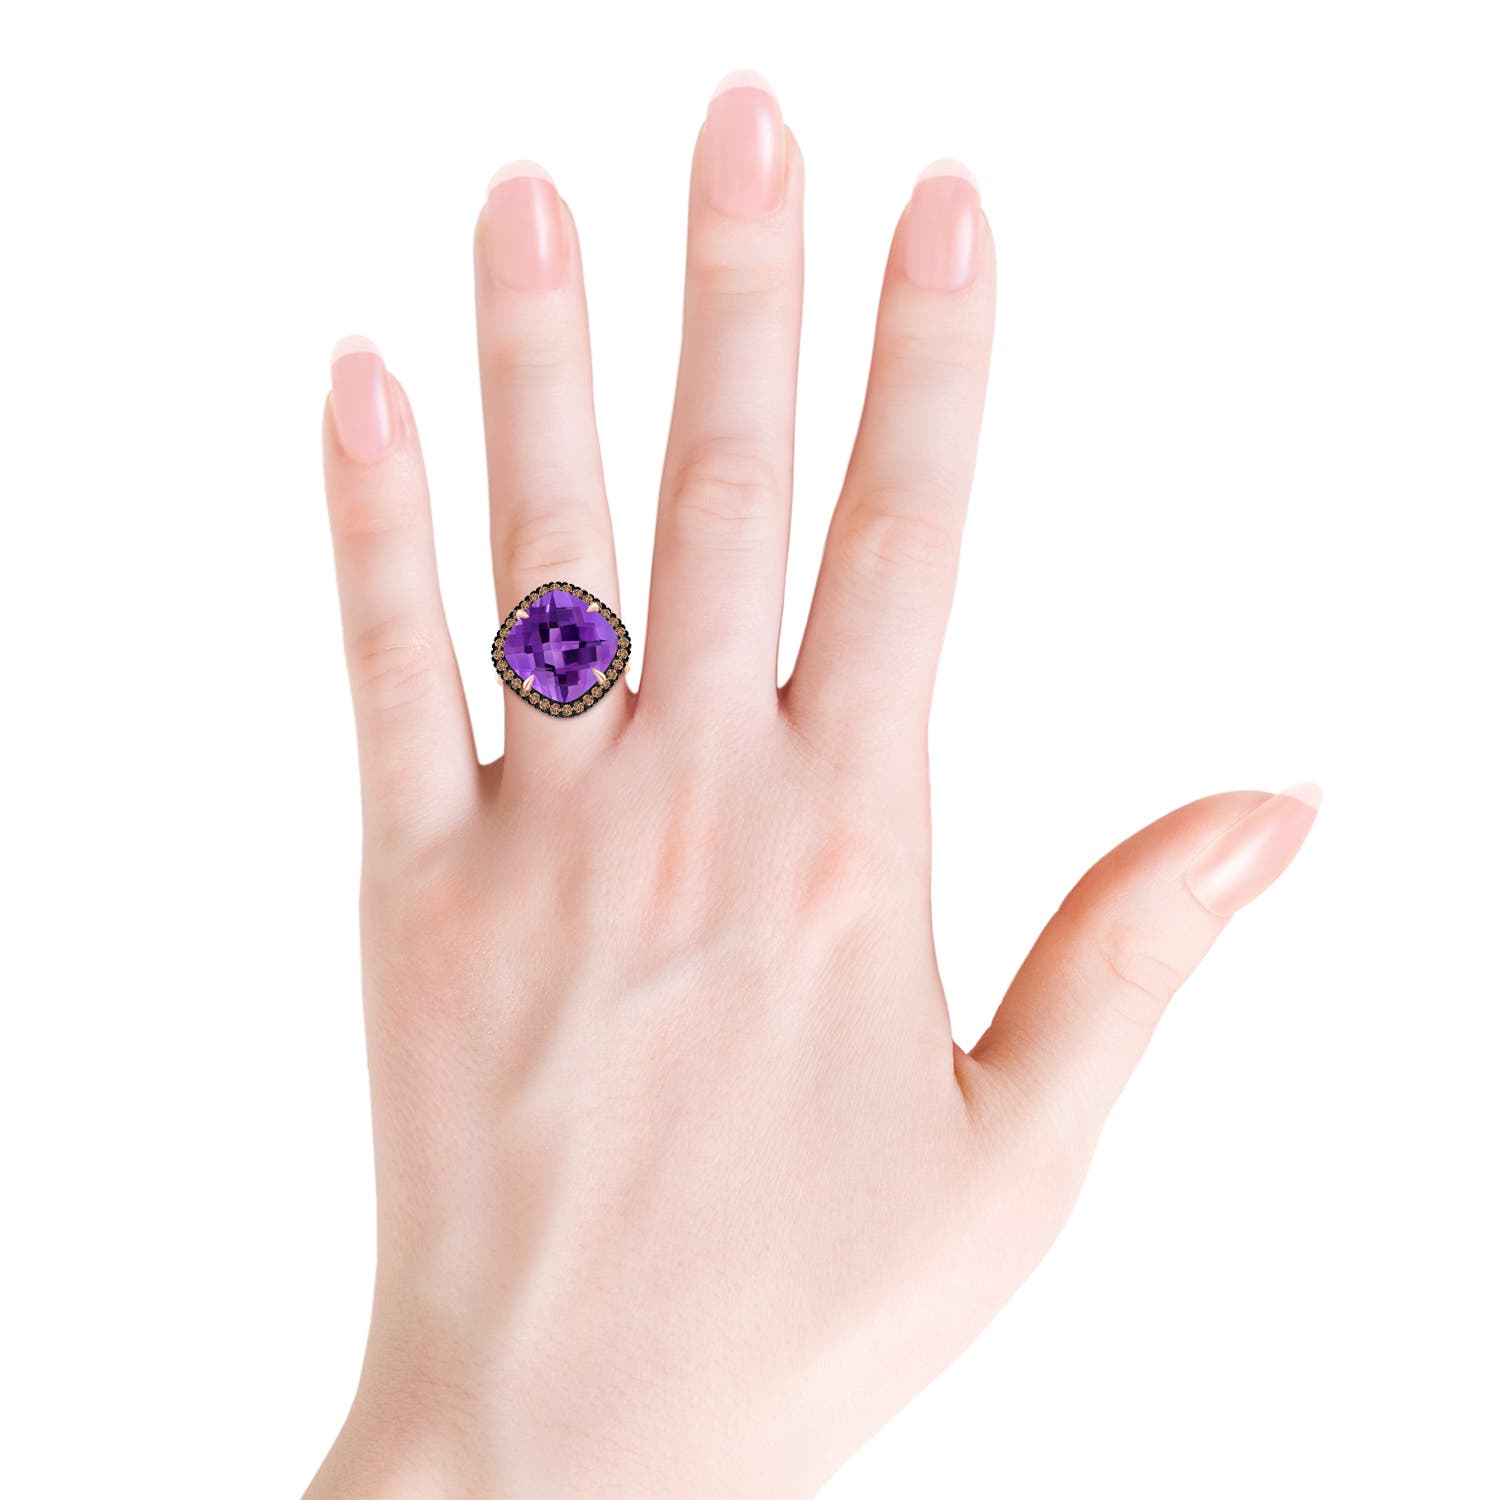 AAA - Amethyst / 8.38 CT / 14 KT Rose Gold